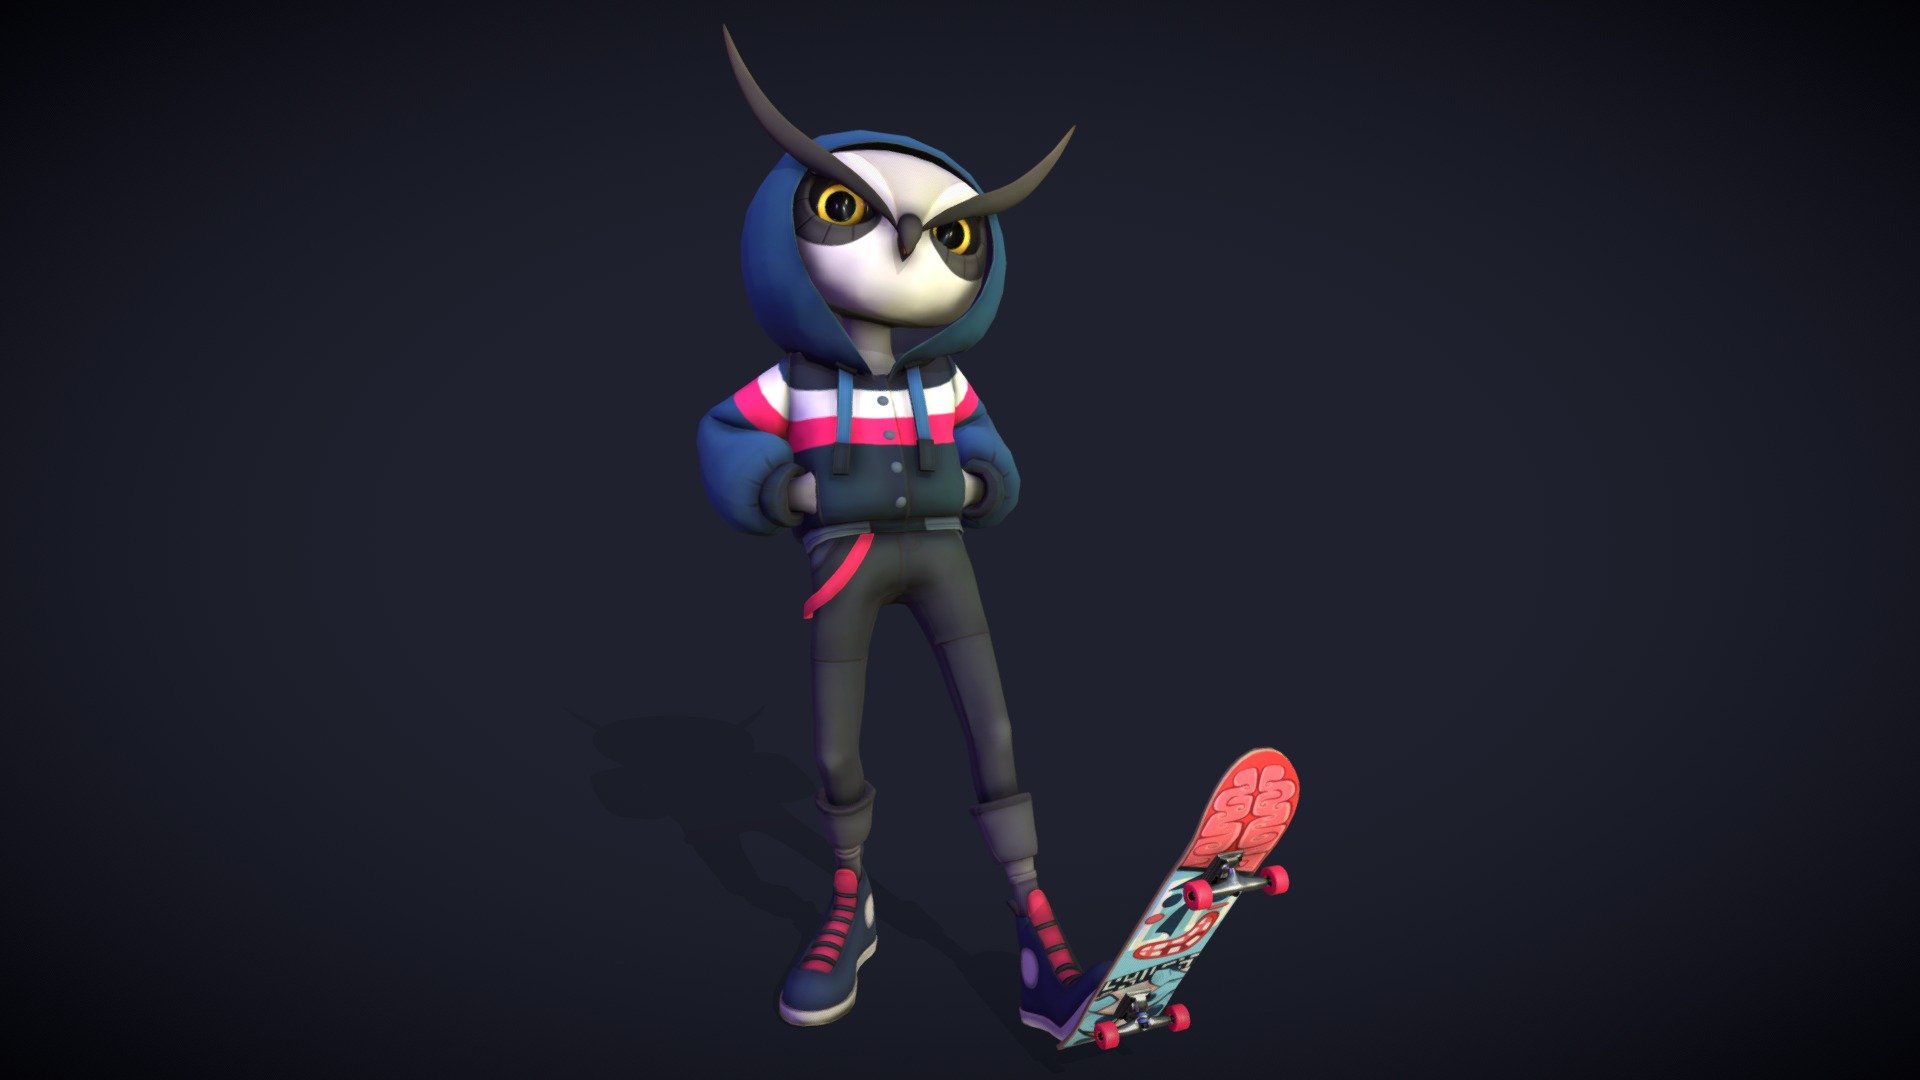 I've created a 3D character model based on the character &ldquo;Rico